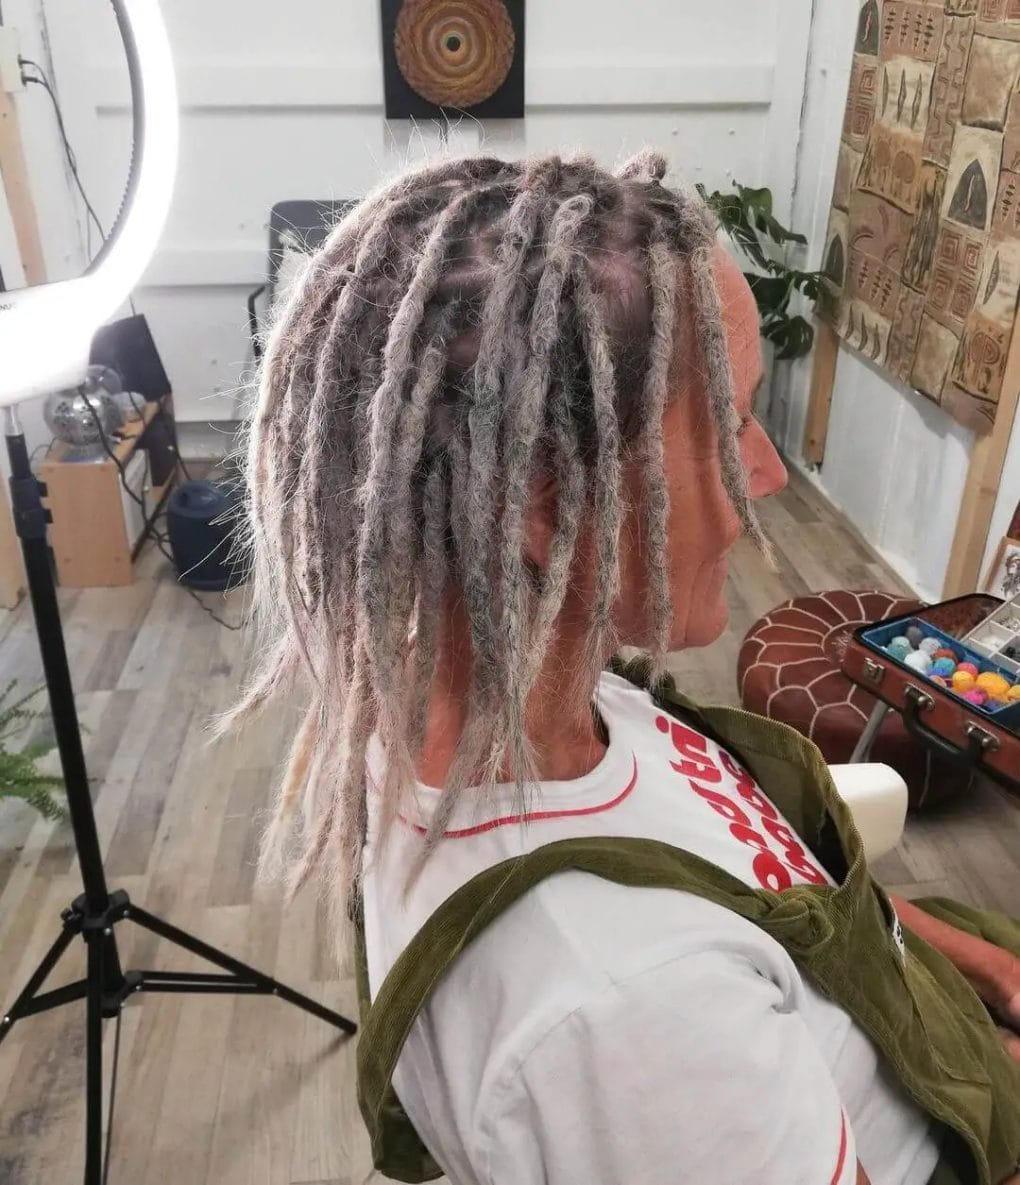 Gradient of white dreadlocks transitioning from short in the front to shoulder length at the back.